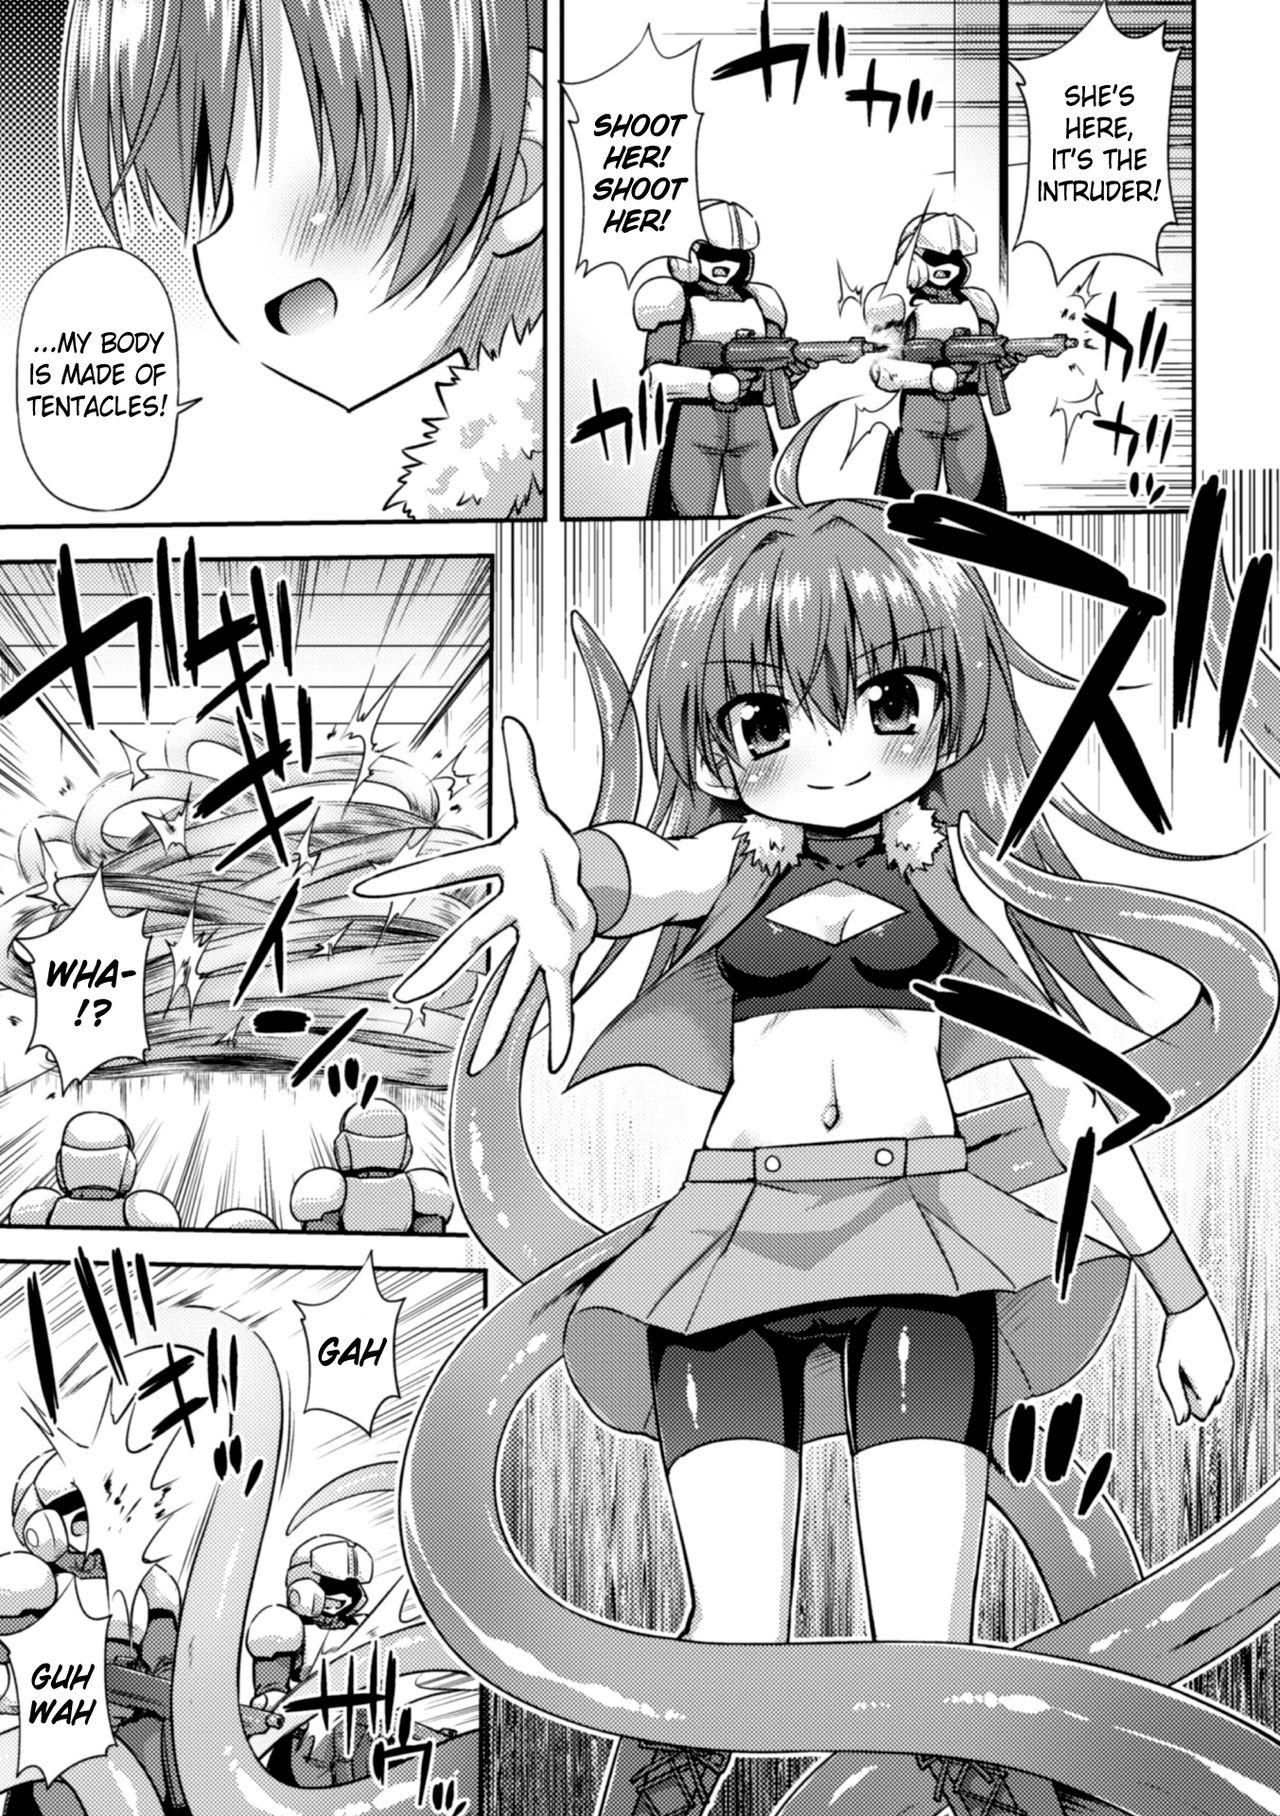 Boquete This World is all Tentacles | Konoyo wa Subete Tentacle! Big Natural Tits - Page 5